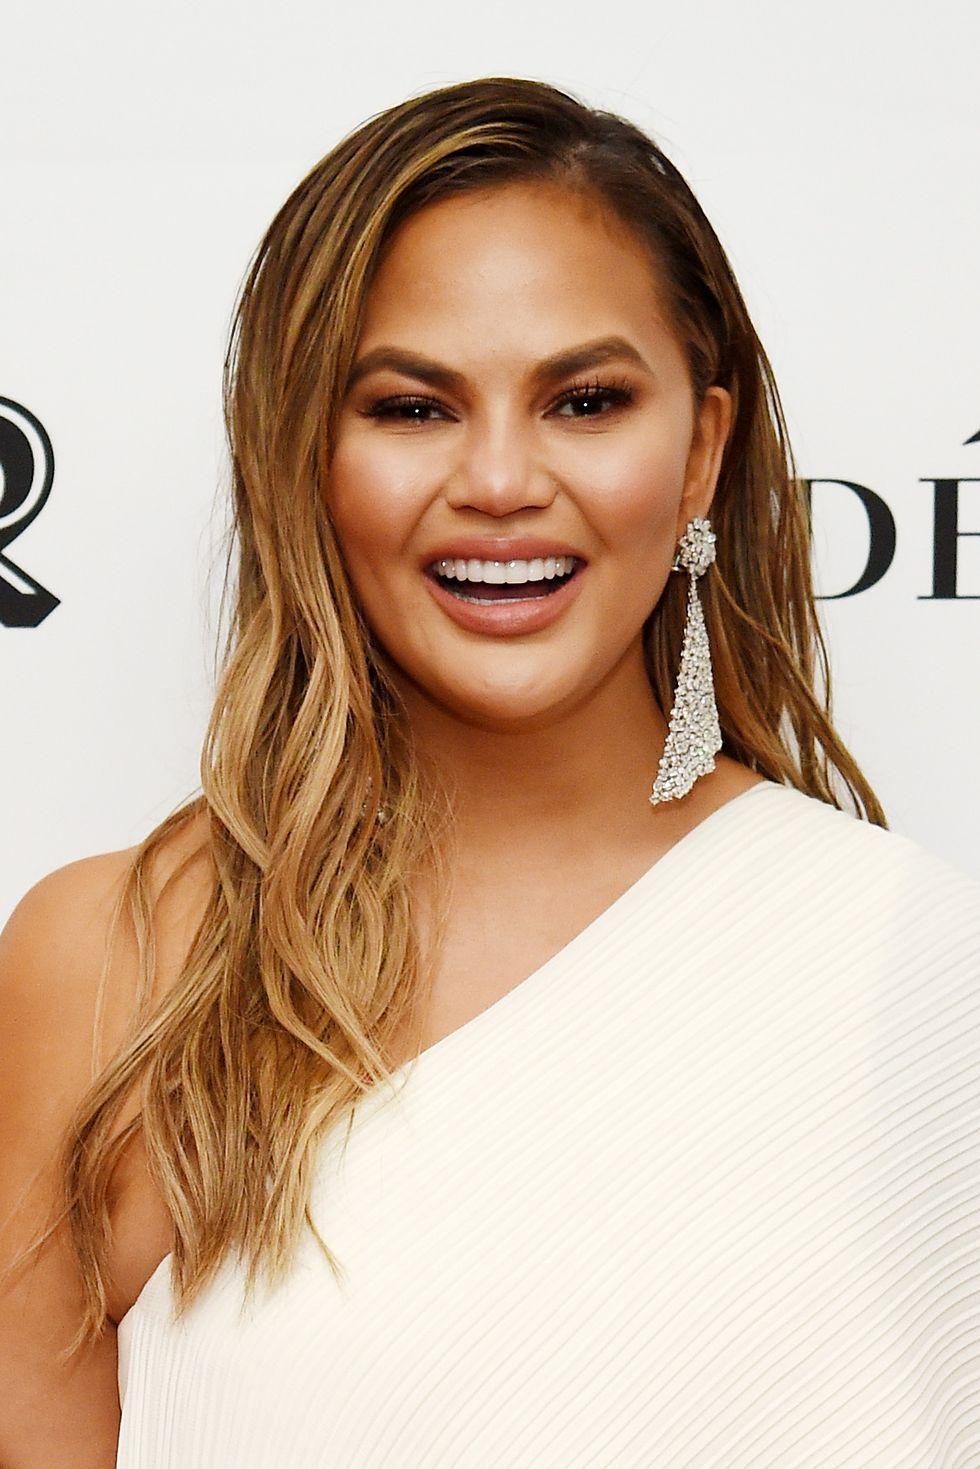 chrissy-teigen-attends-the-2018-glamour-women-of-the-year-news-photo-1060840938-1547142507